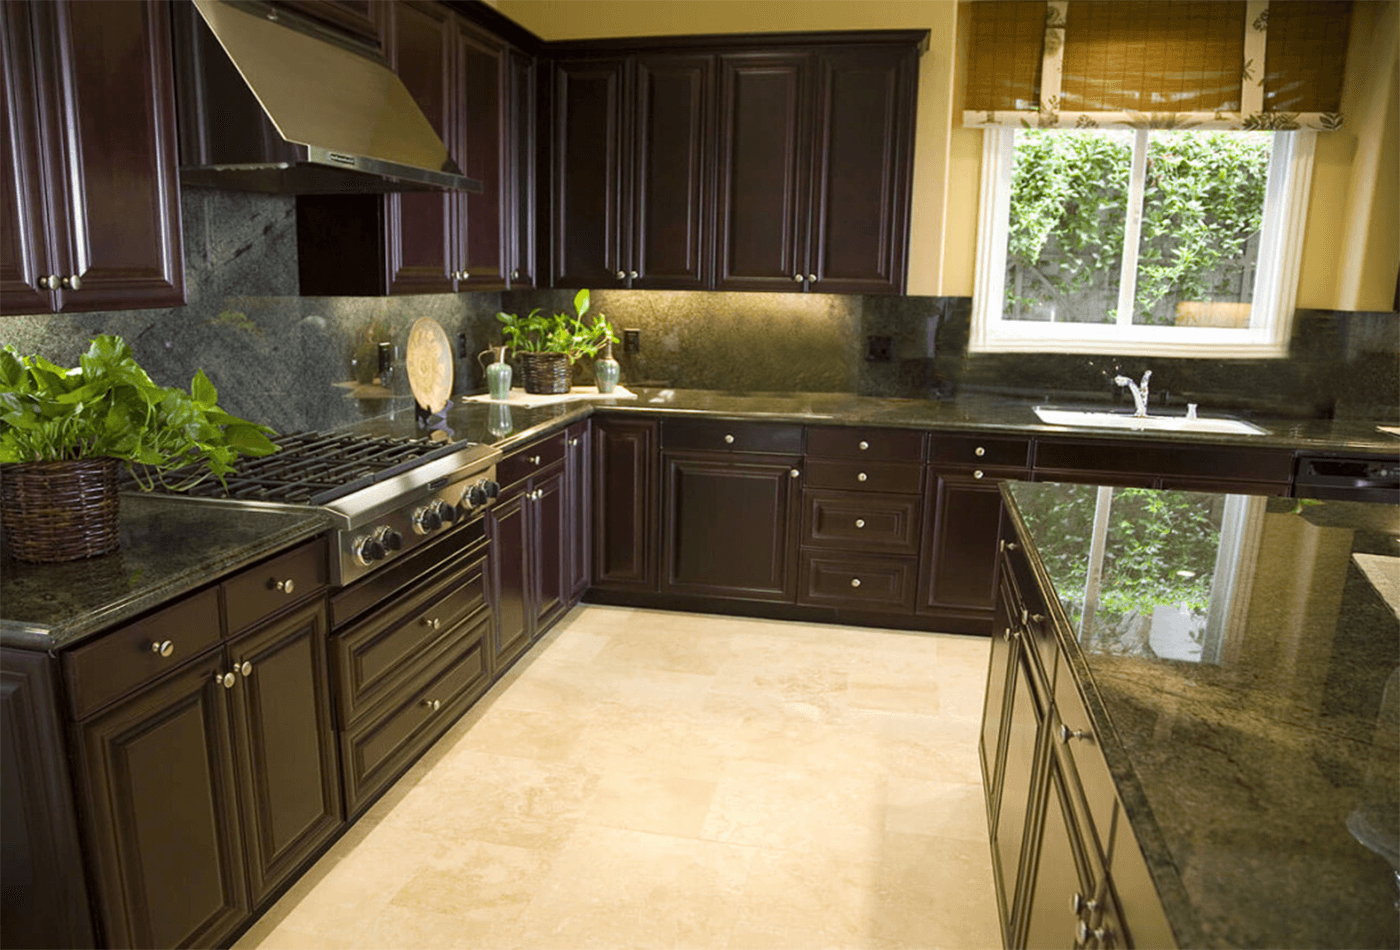 Greenish Granite; Bring  Out the Nature into Your Kitchen